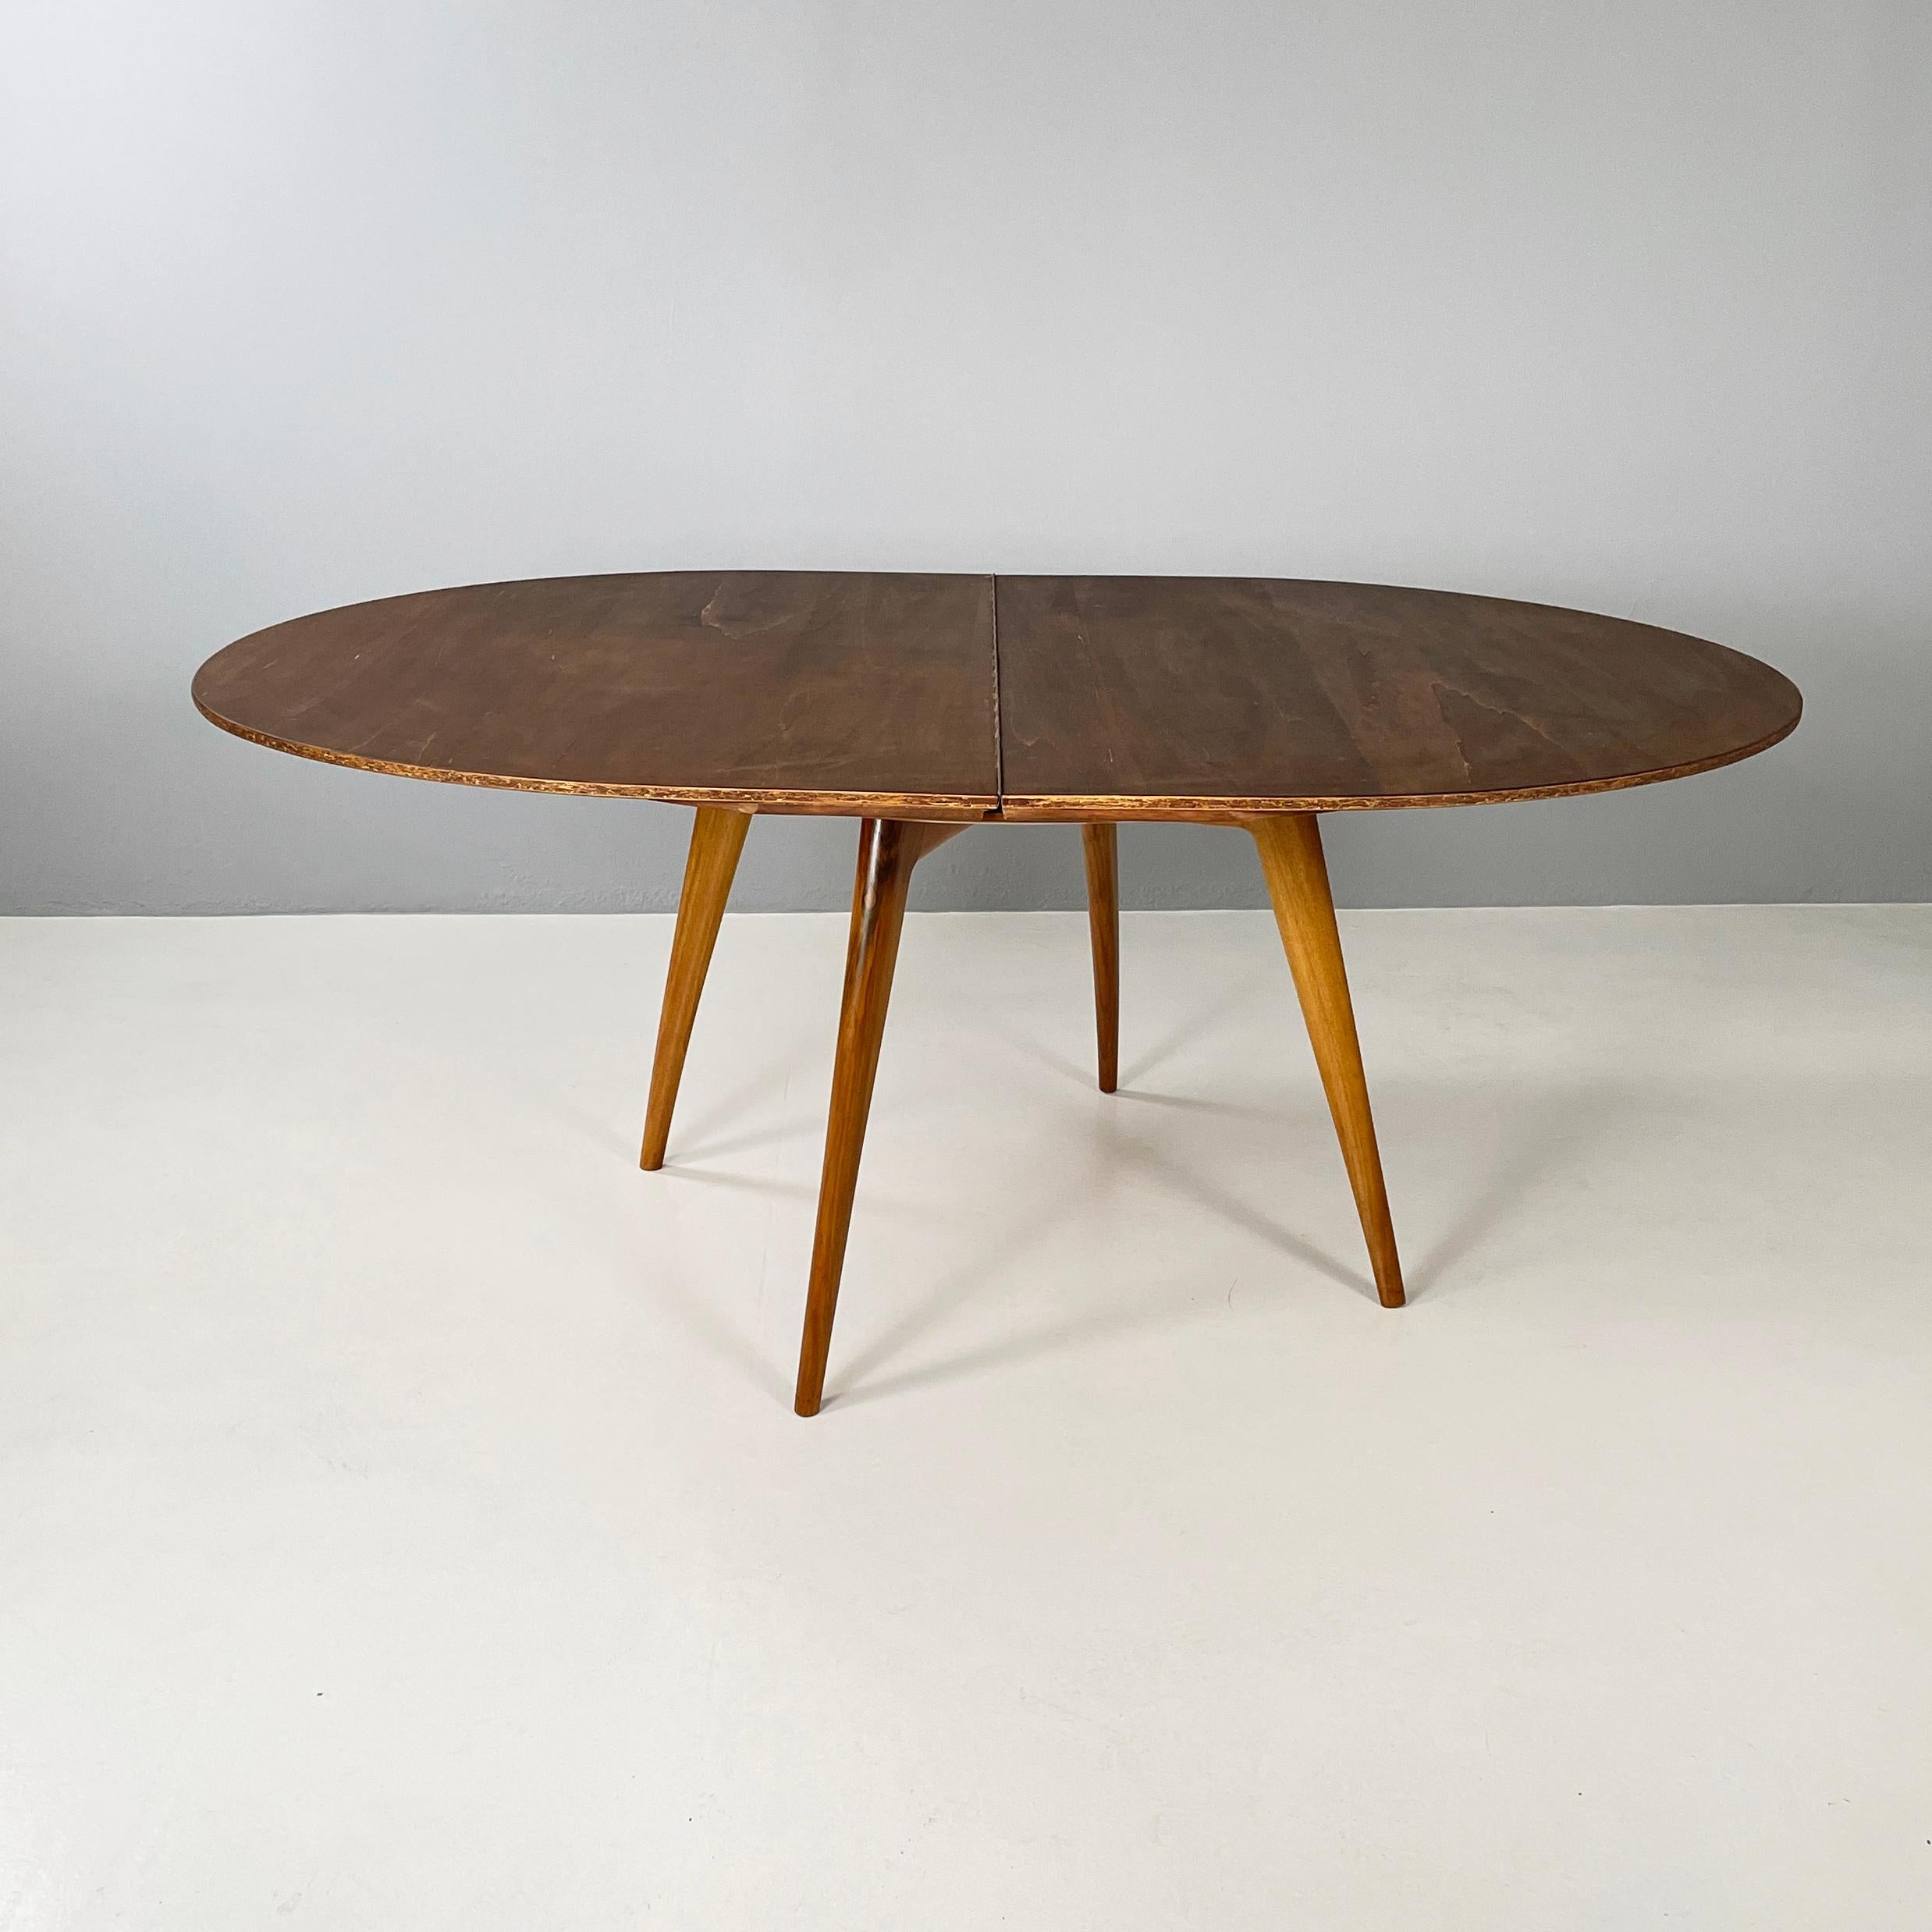 Italian mid-century modern Wooden dining table with extension, 1960s
Dining table made entirely of wood. The top can be round or, using the extension, oval. Round section legs.
1960 approx.
Good condition, the extension shows signs of use. the round